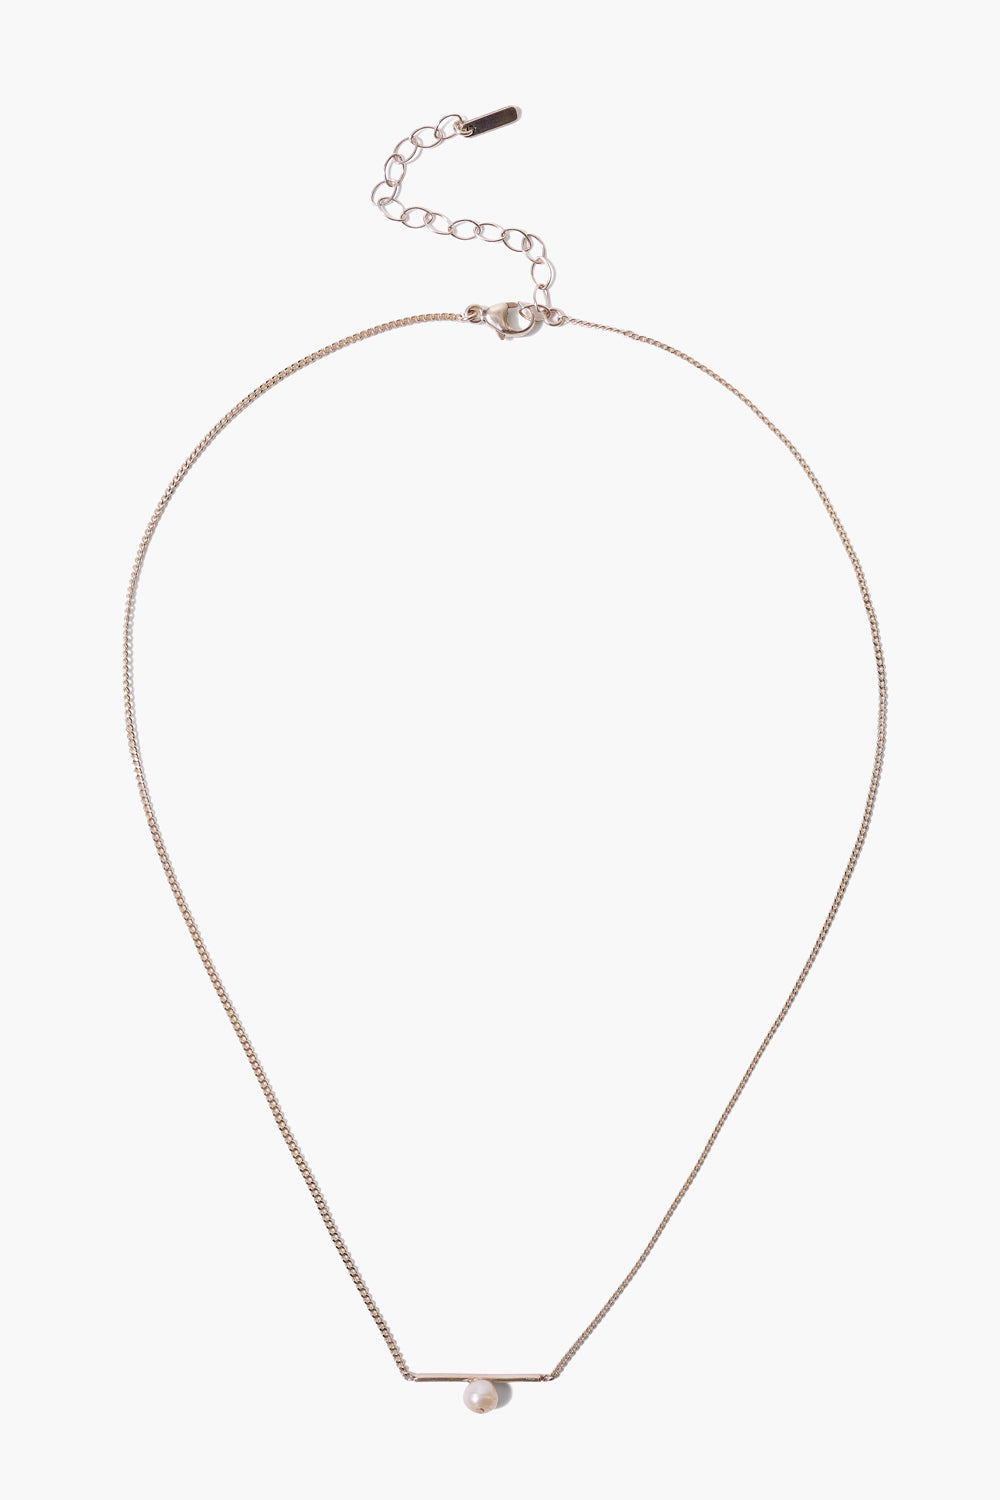 WHITE PEARL SILVER BAR NECKLACE - Kingfisher Road - Online Boutique